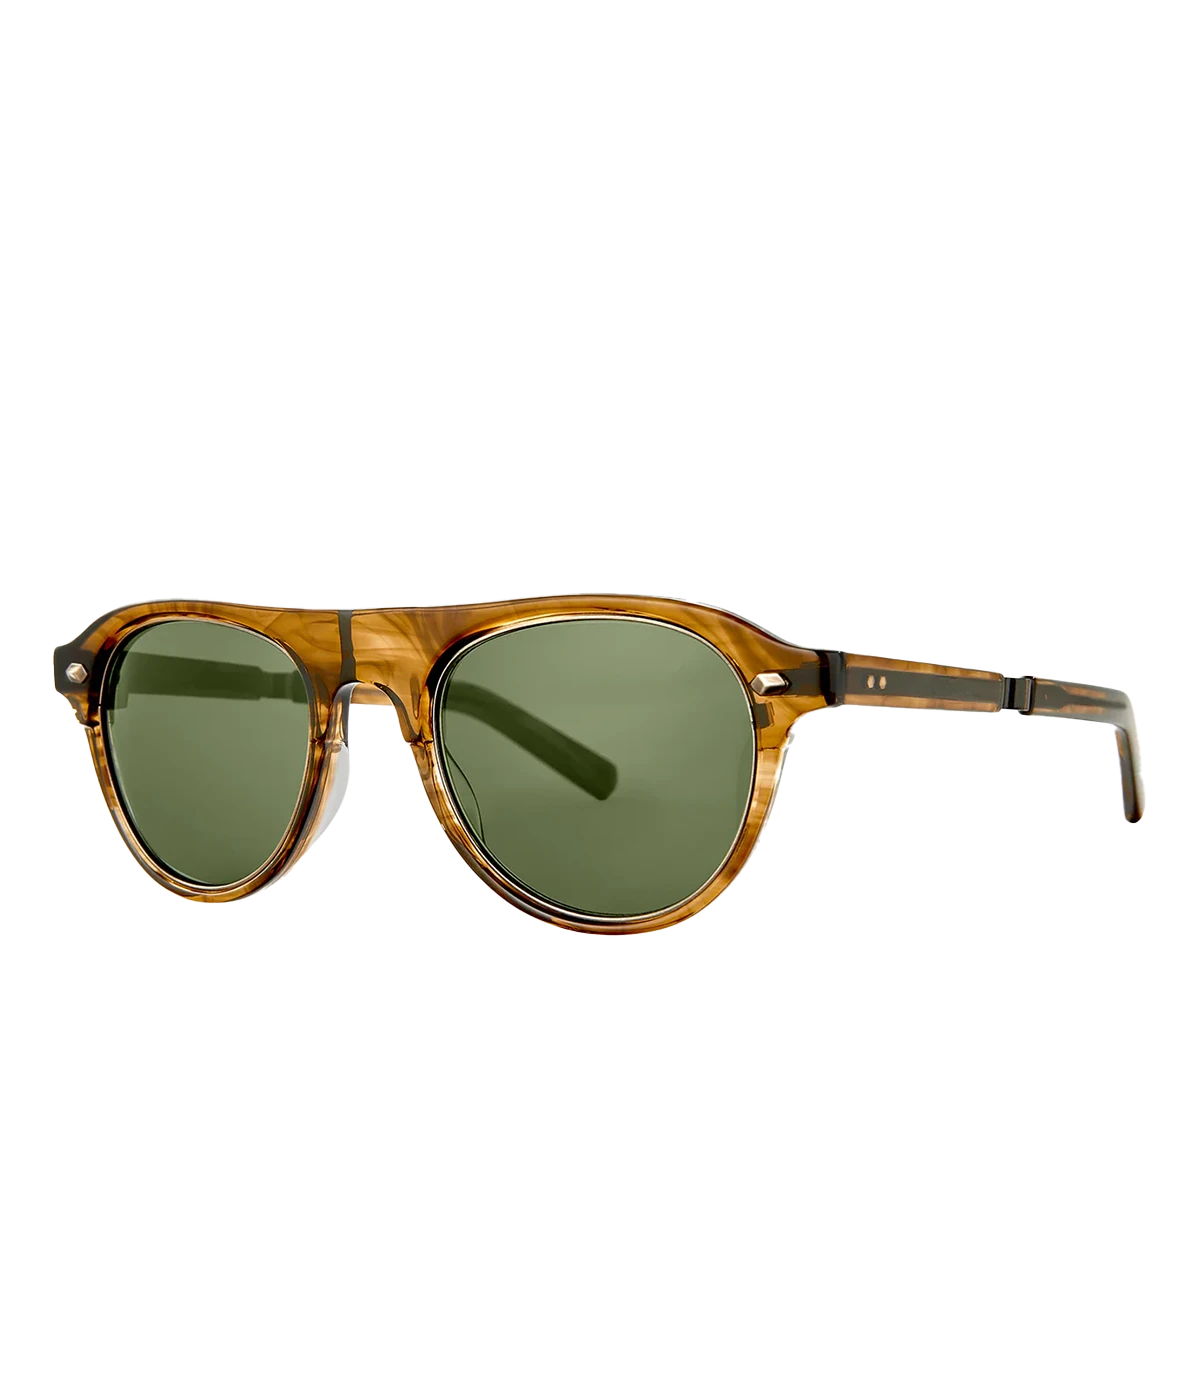 Stahl Sun 49 Sunglasses in Marbled Gold & Green